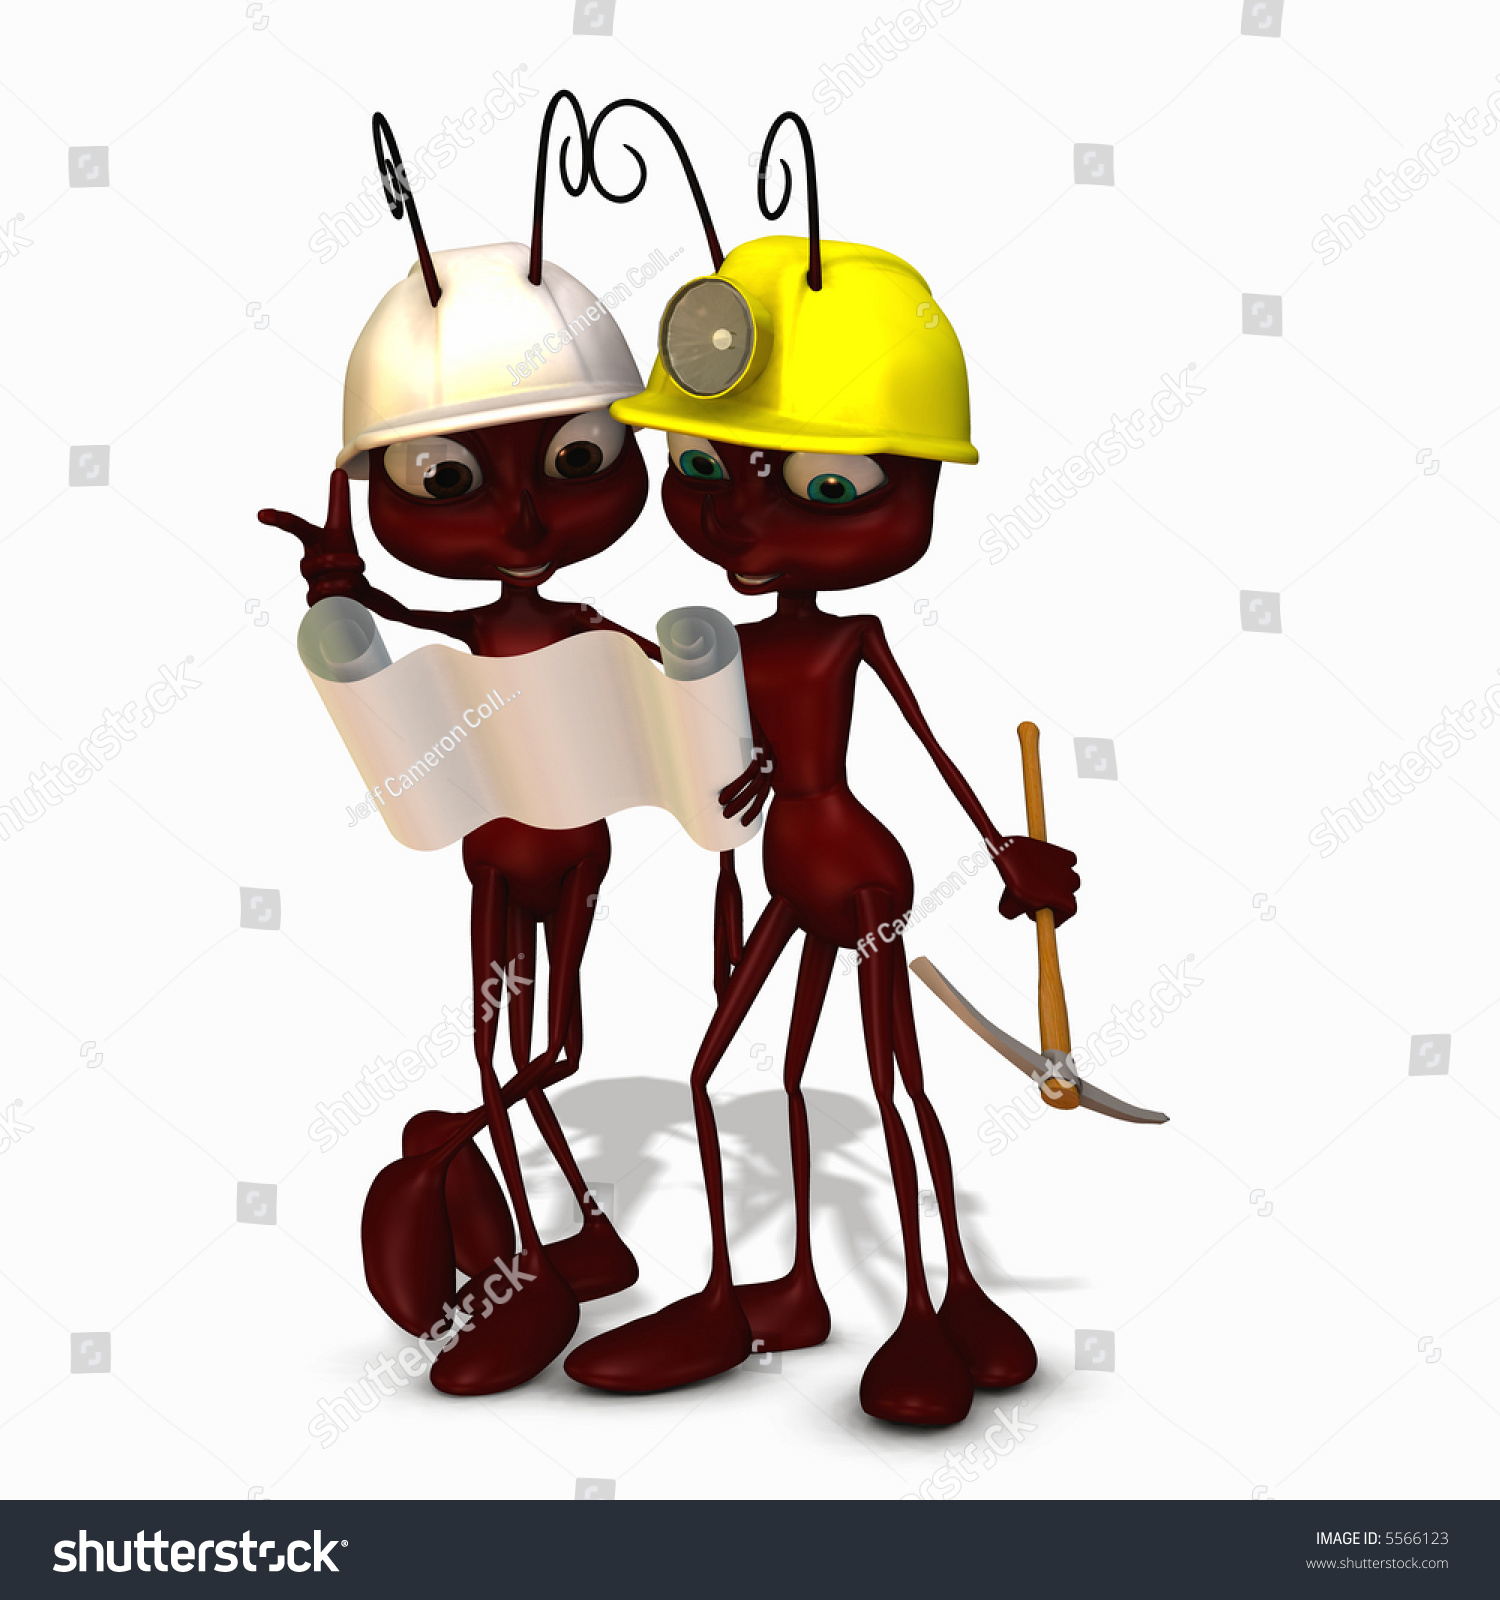 worker ant clipart - photo #34